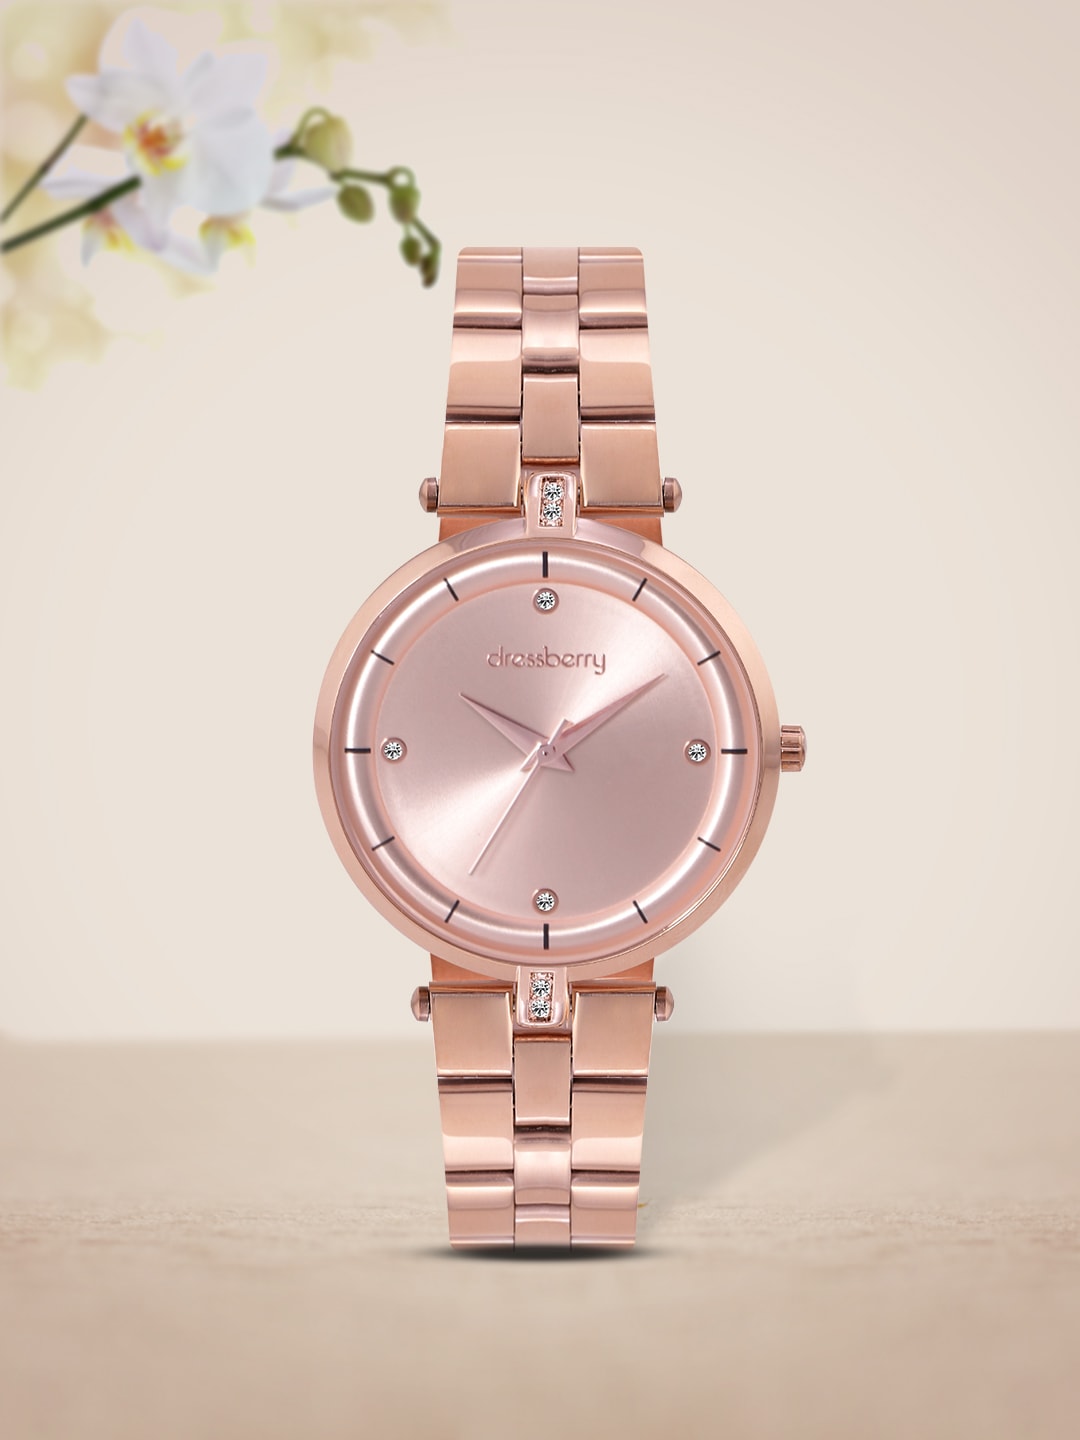 DressBerry Women Rose Gold-Toned Analogue Watch MFB-PN-MF0120L.01 Price in India